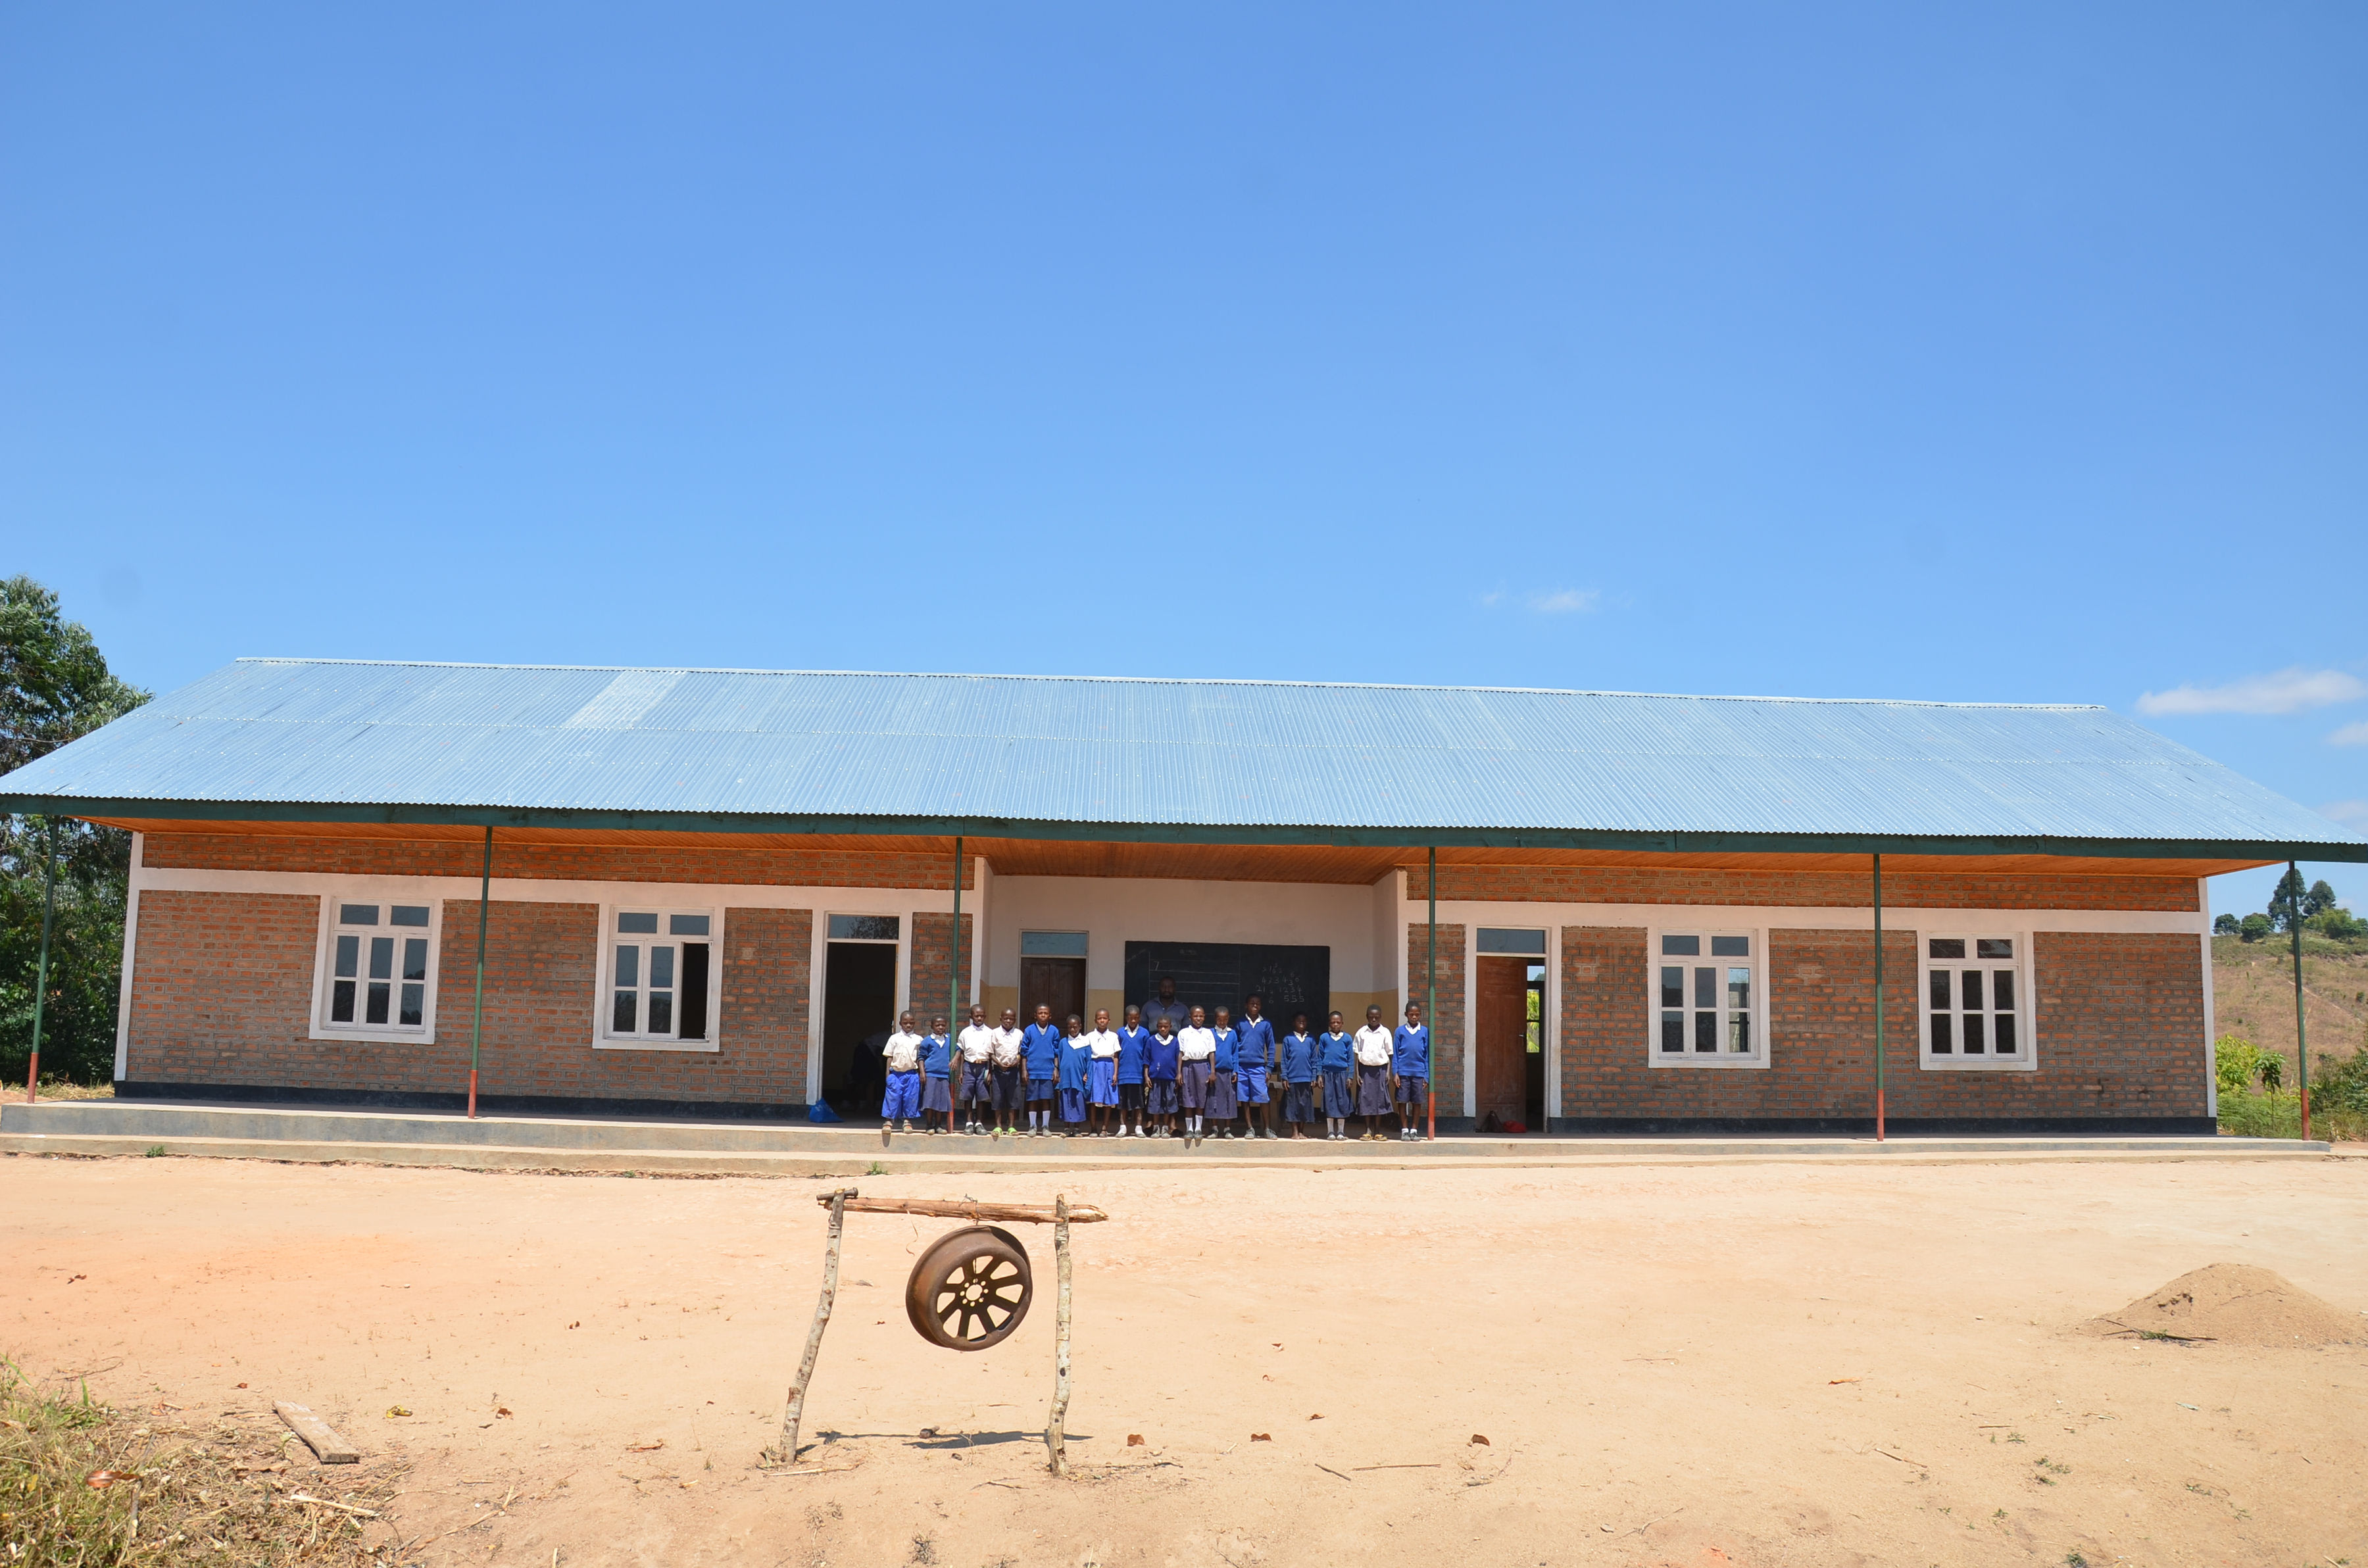 A school built by the project